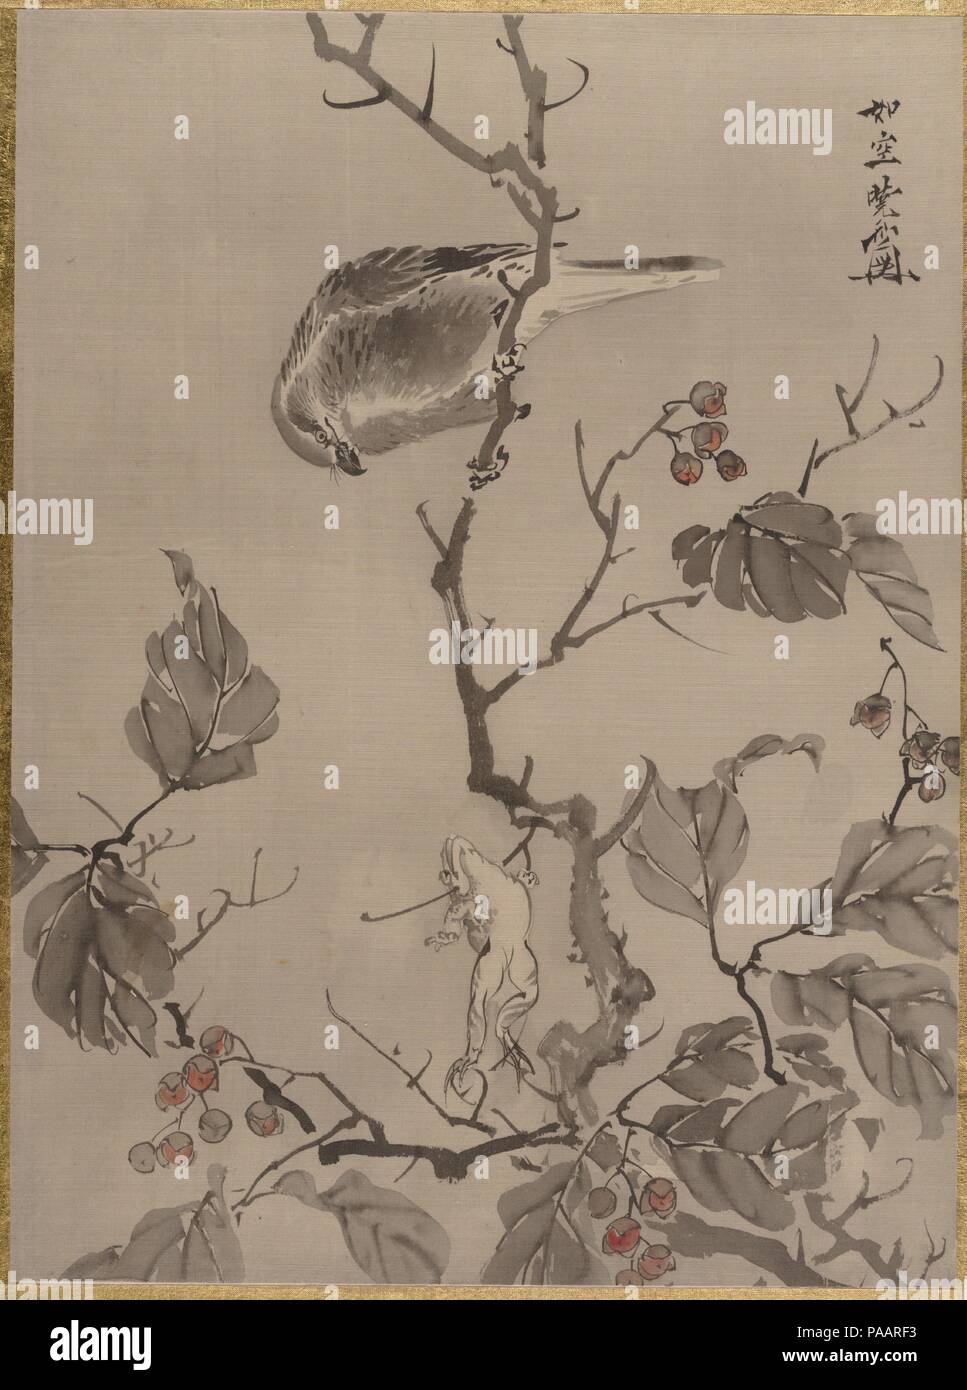 Bird and Frog. Artist: Kawanabe Kyosai (Japanese, 1831-1889). Culture: Japan. Dimensions: 14 1/4 x 10 1/2 in. (36.2 x 26.7 cm). Date: ca. 1887. Museum: Metropolitan Museum of Art, New York, USA. Stock Photo